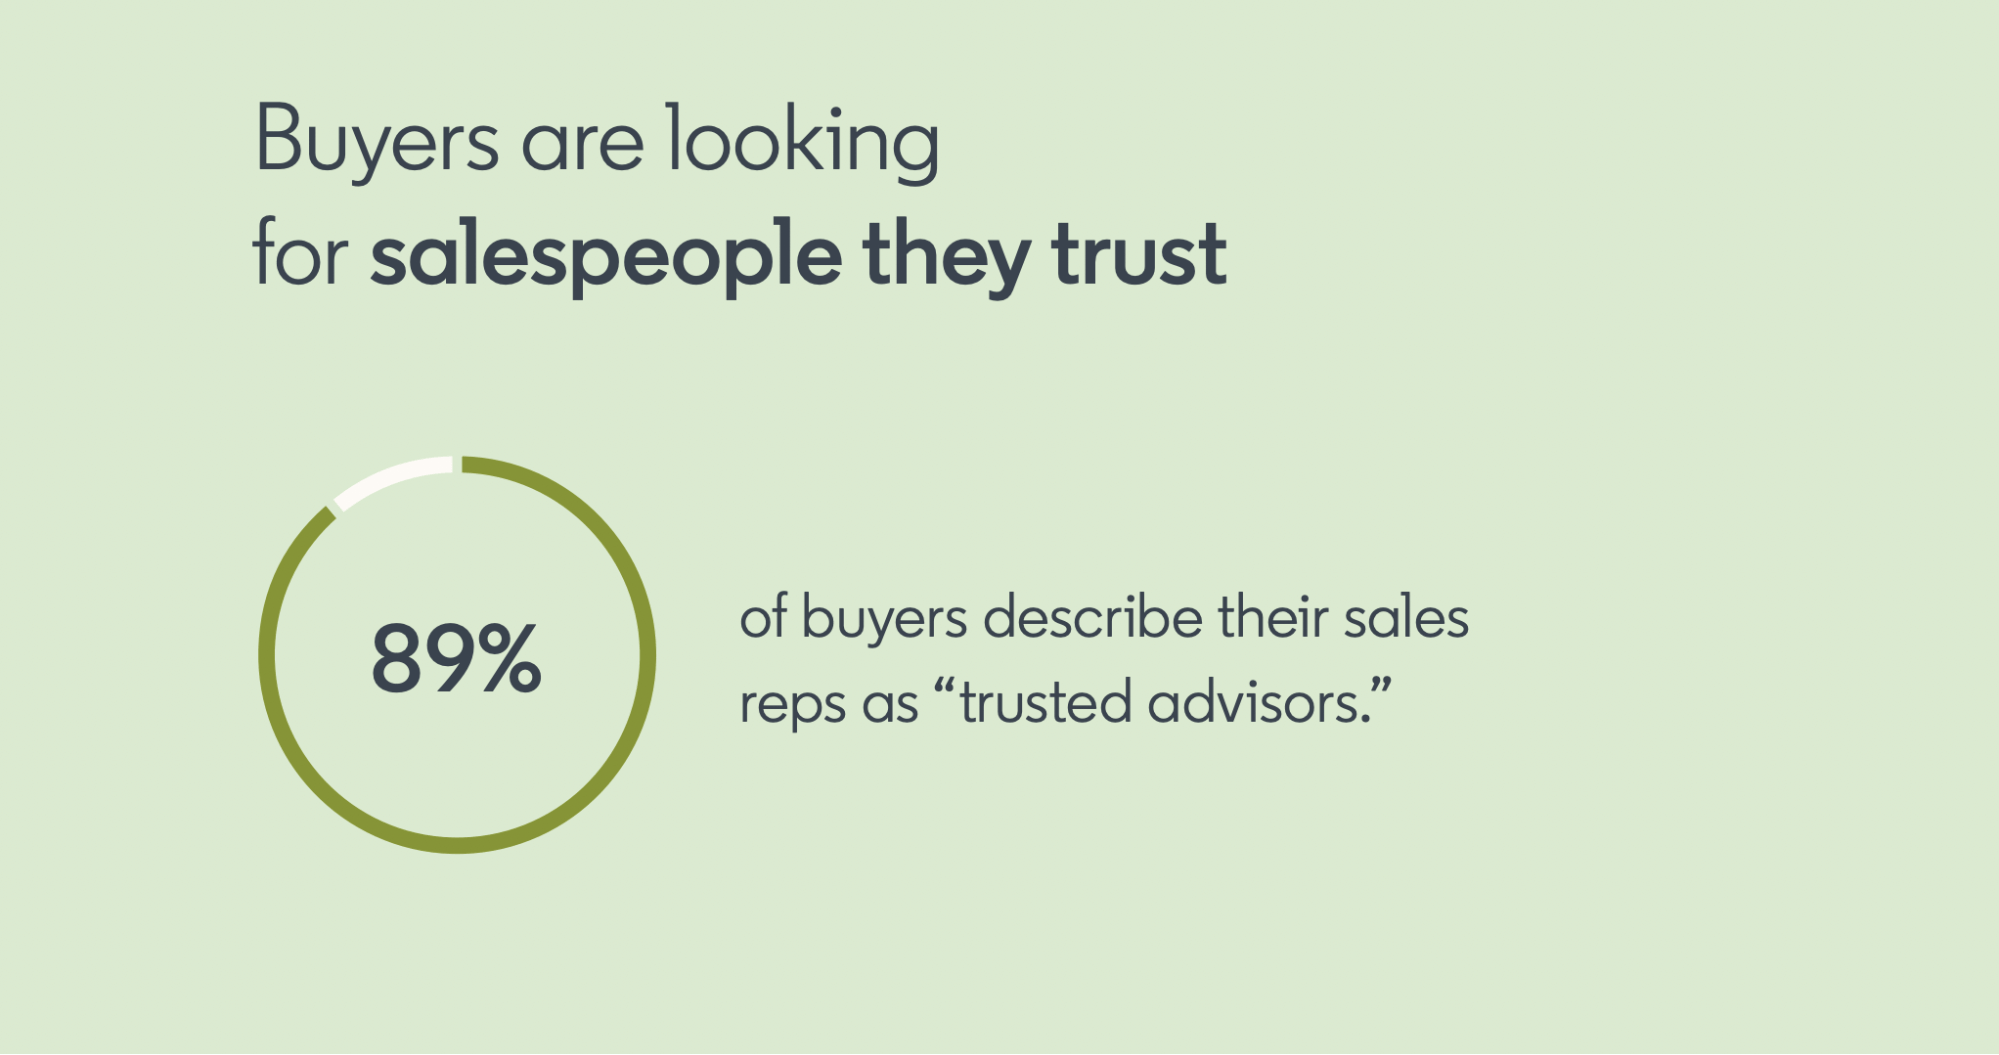 Buyers describe sales reps they do business with as trust advisors